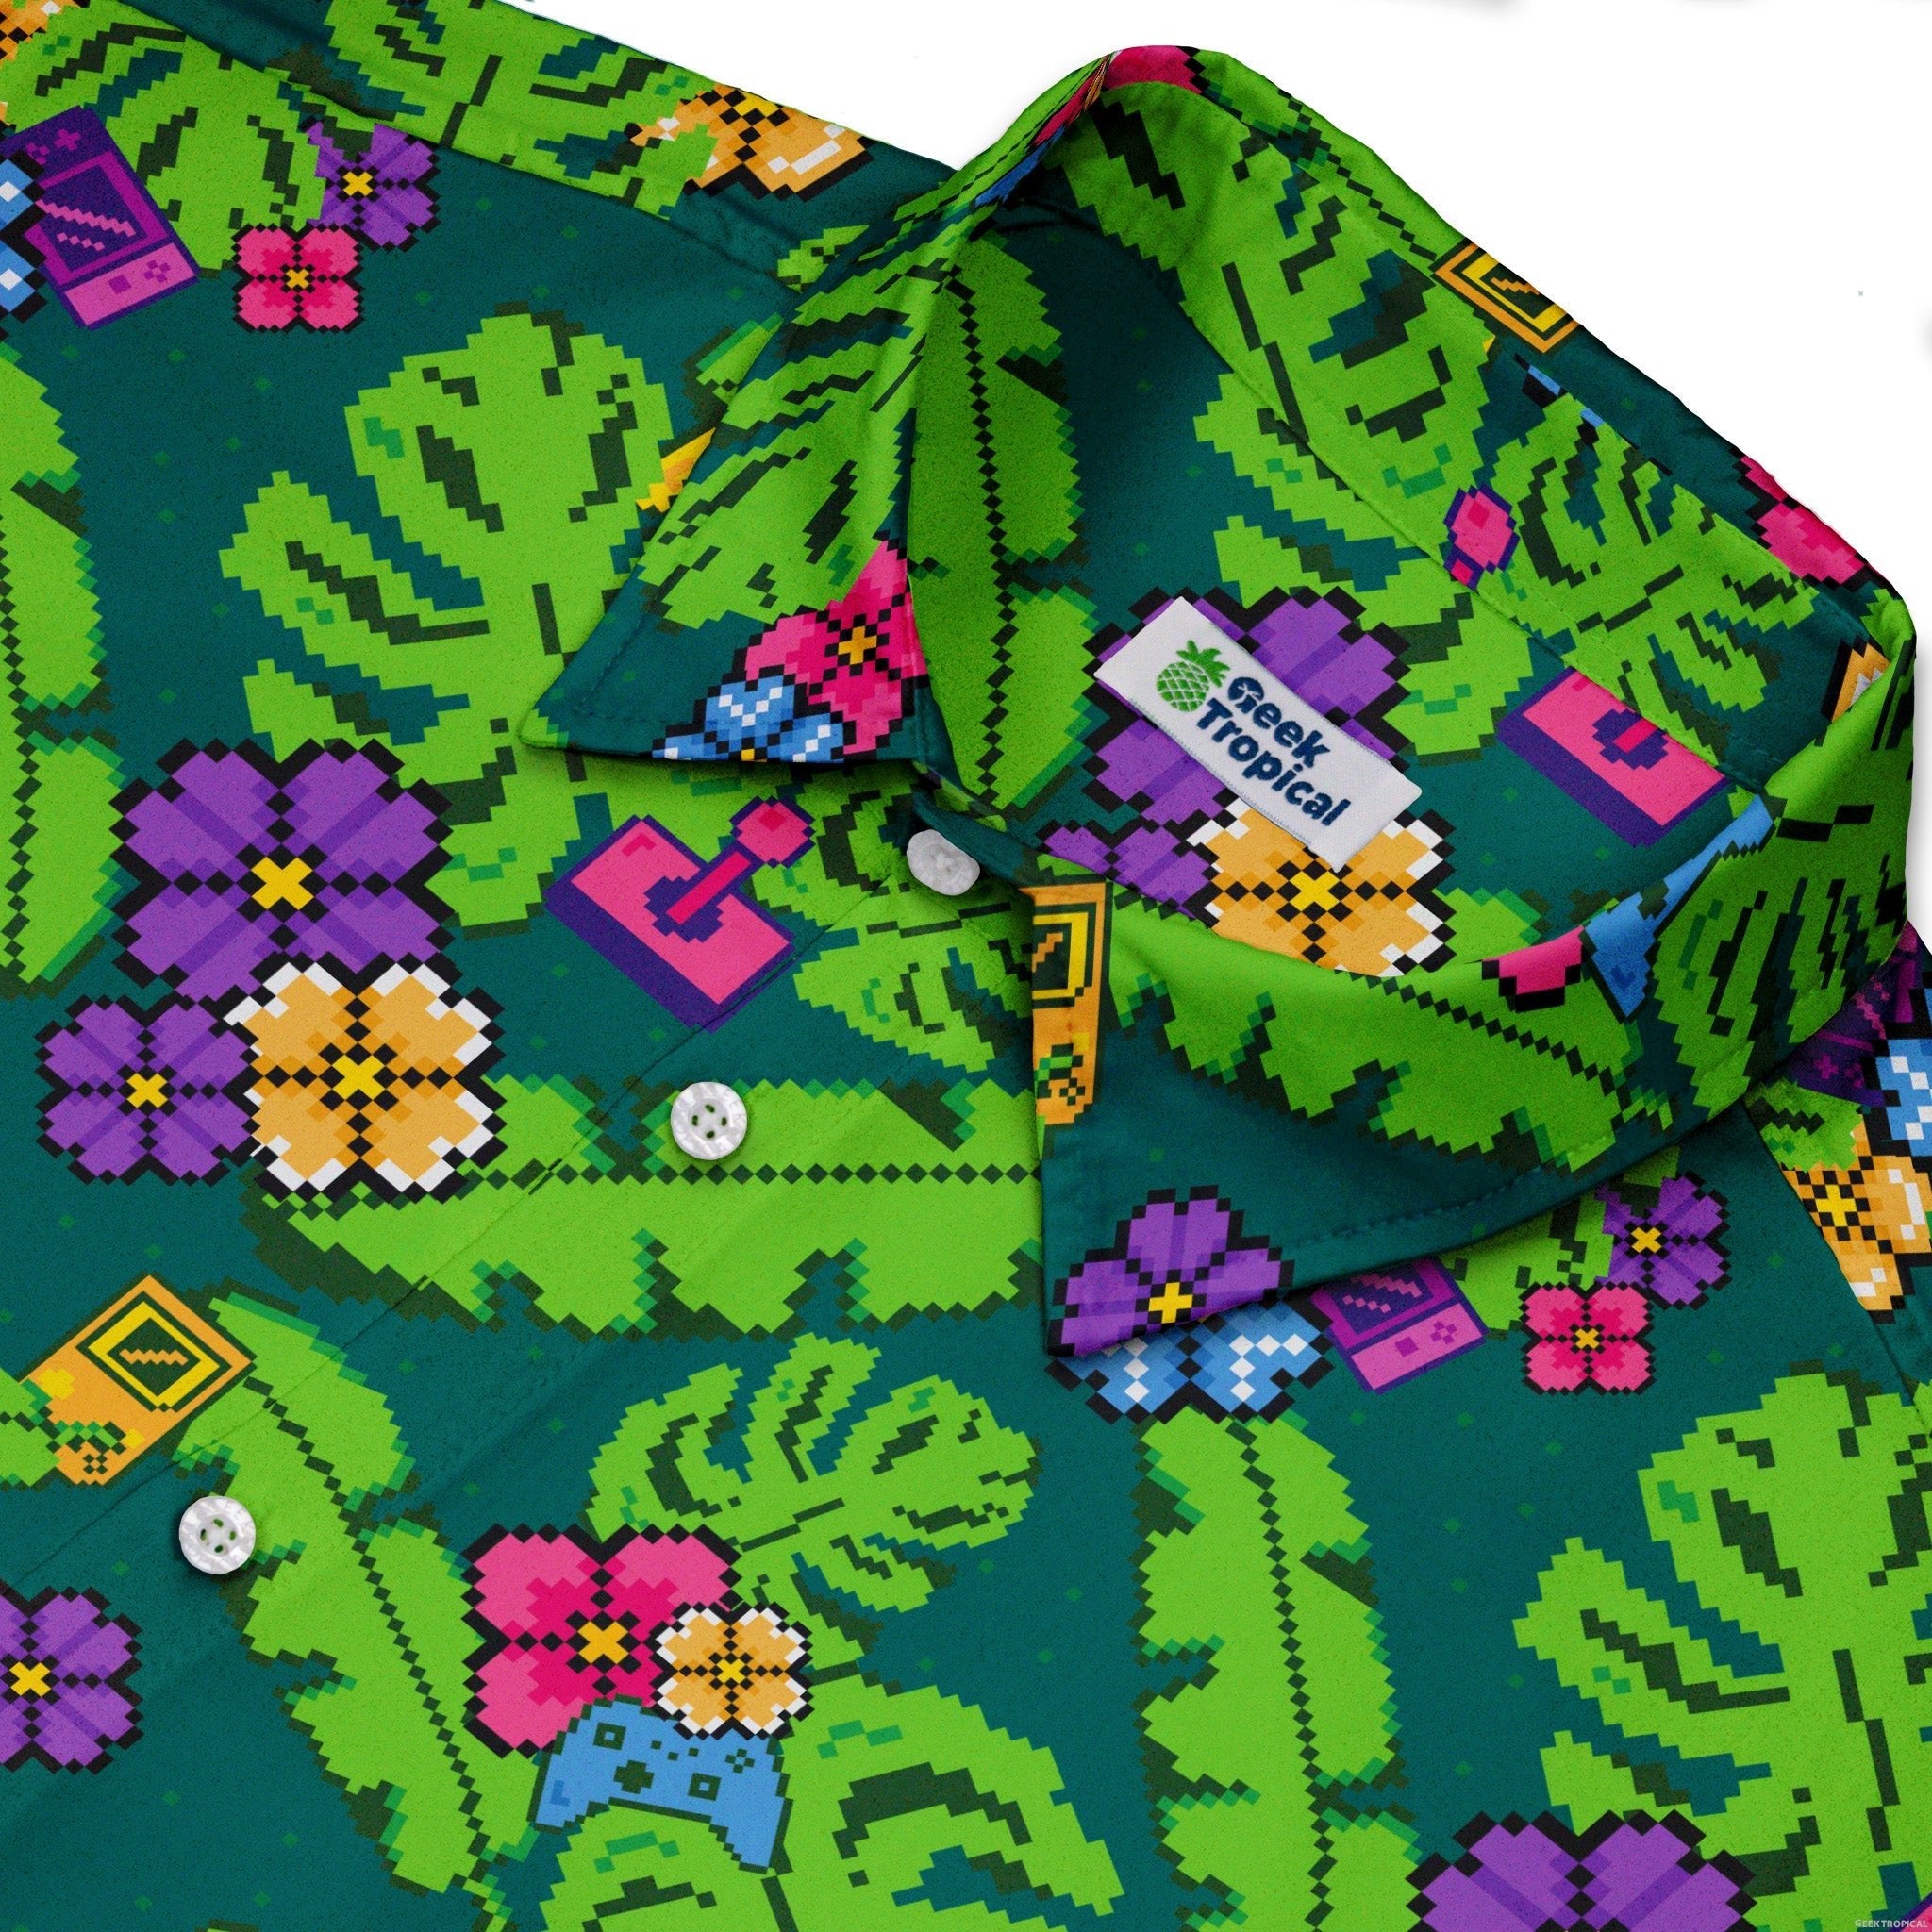 Tropical Video Game Pixels Button Up Shirt - adult sizing - Design by Dunking Toast - Tropical Hawaiian Patterns